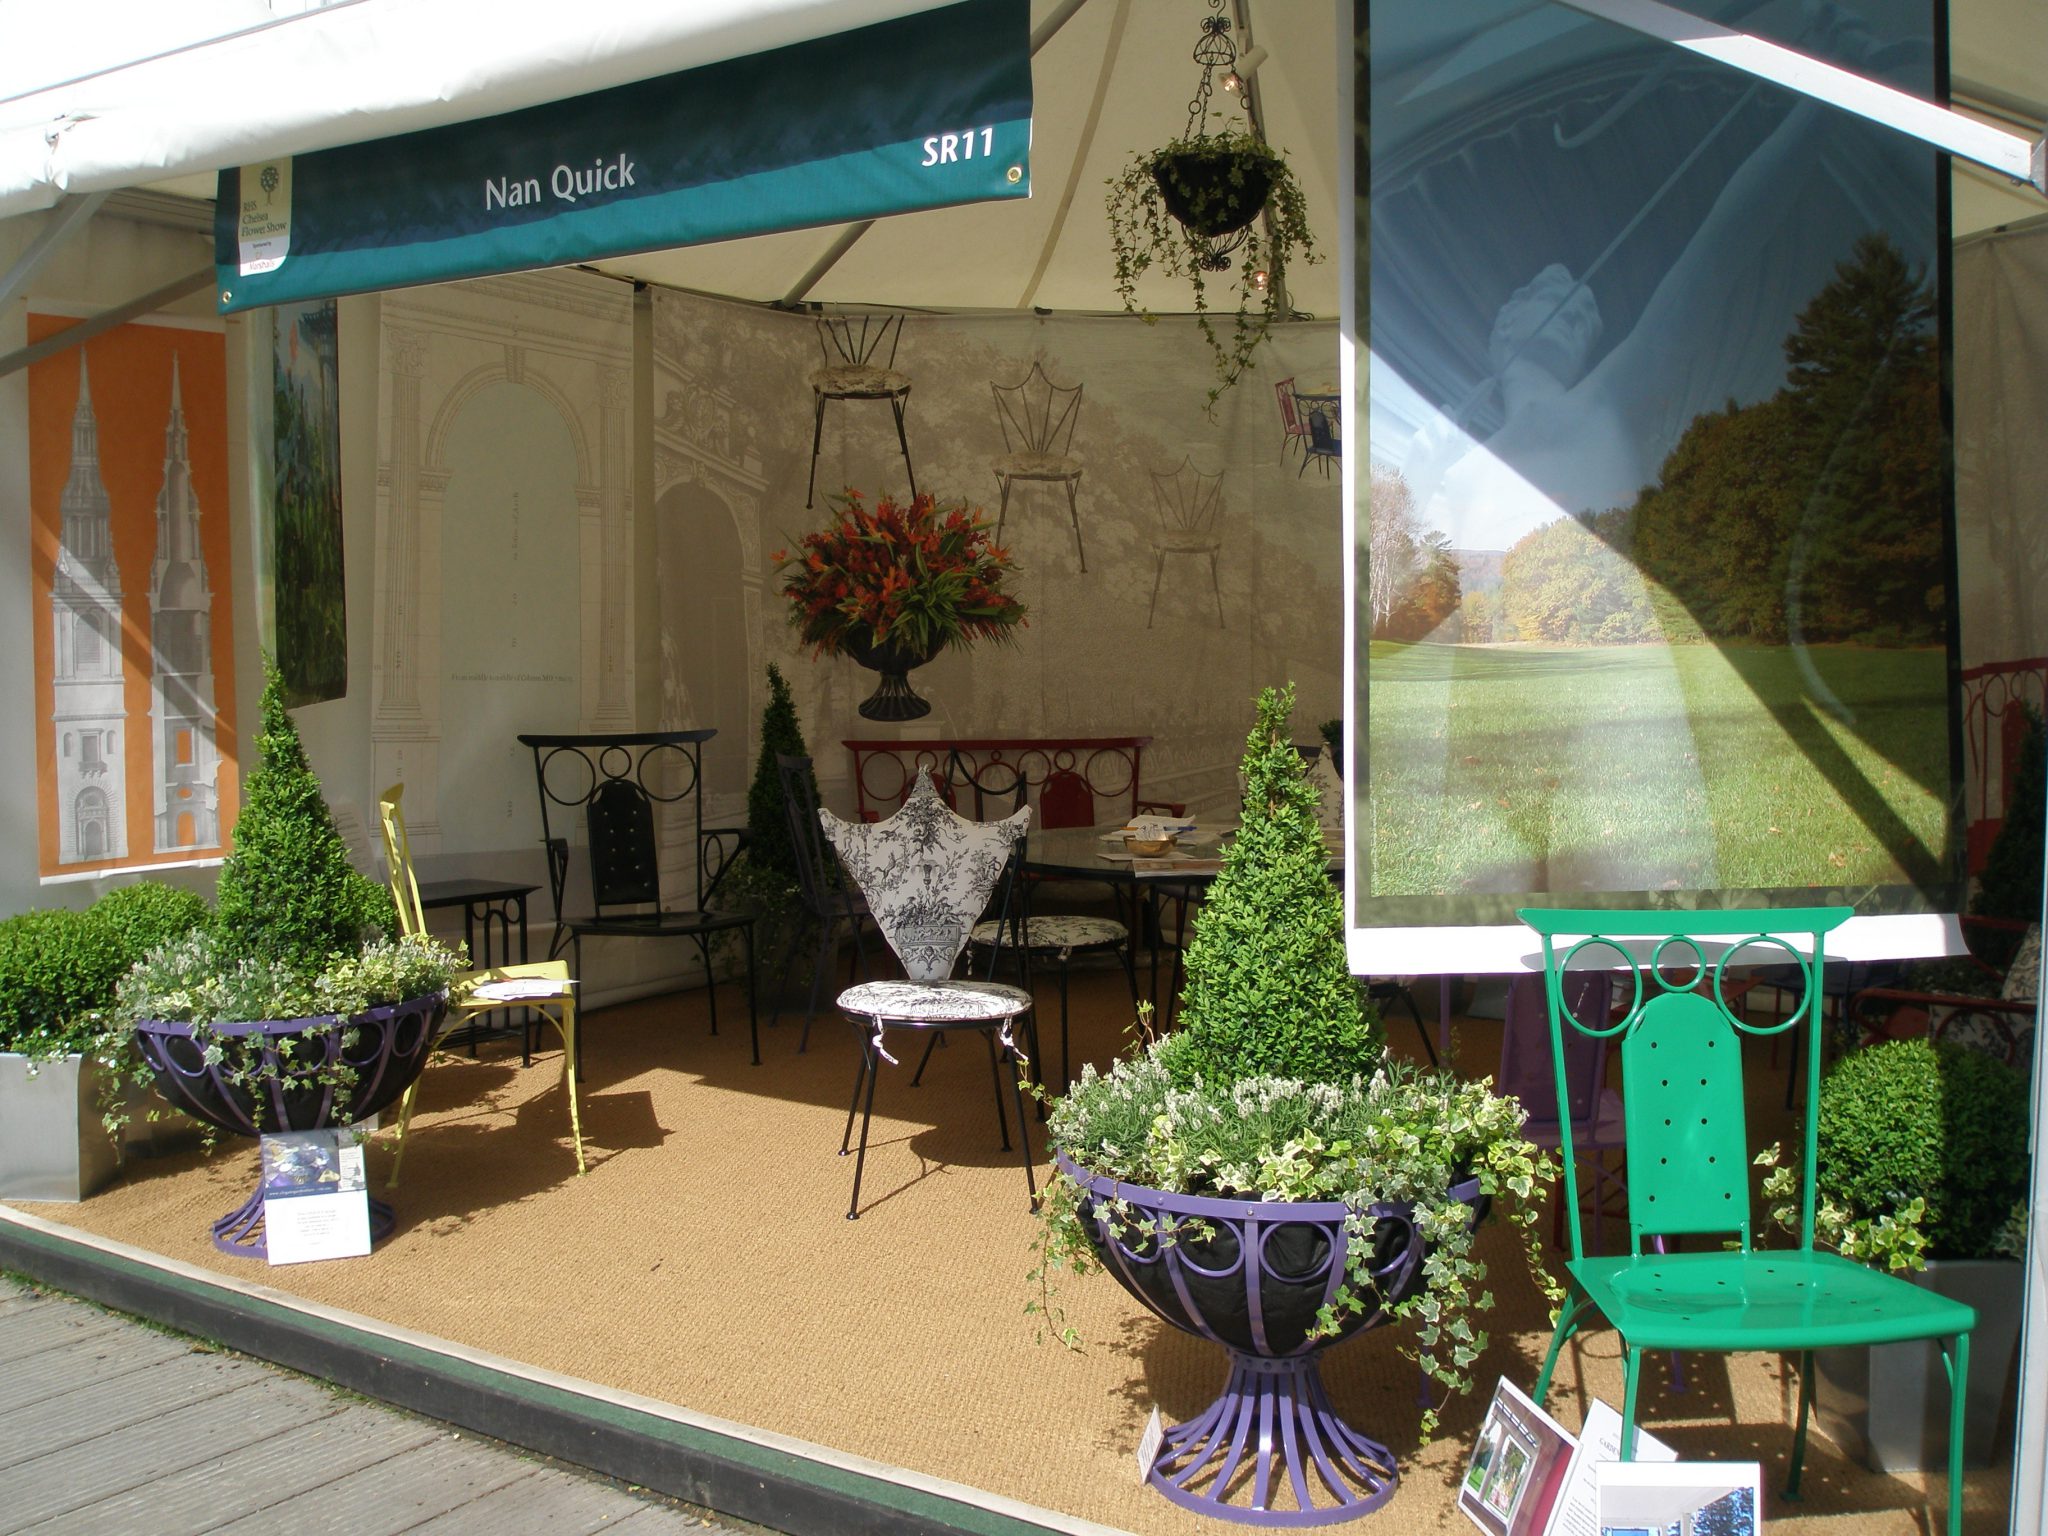 Our Chelsea Flower Show tent, on the grounds of Christopher Wren's Royal Hospital